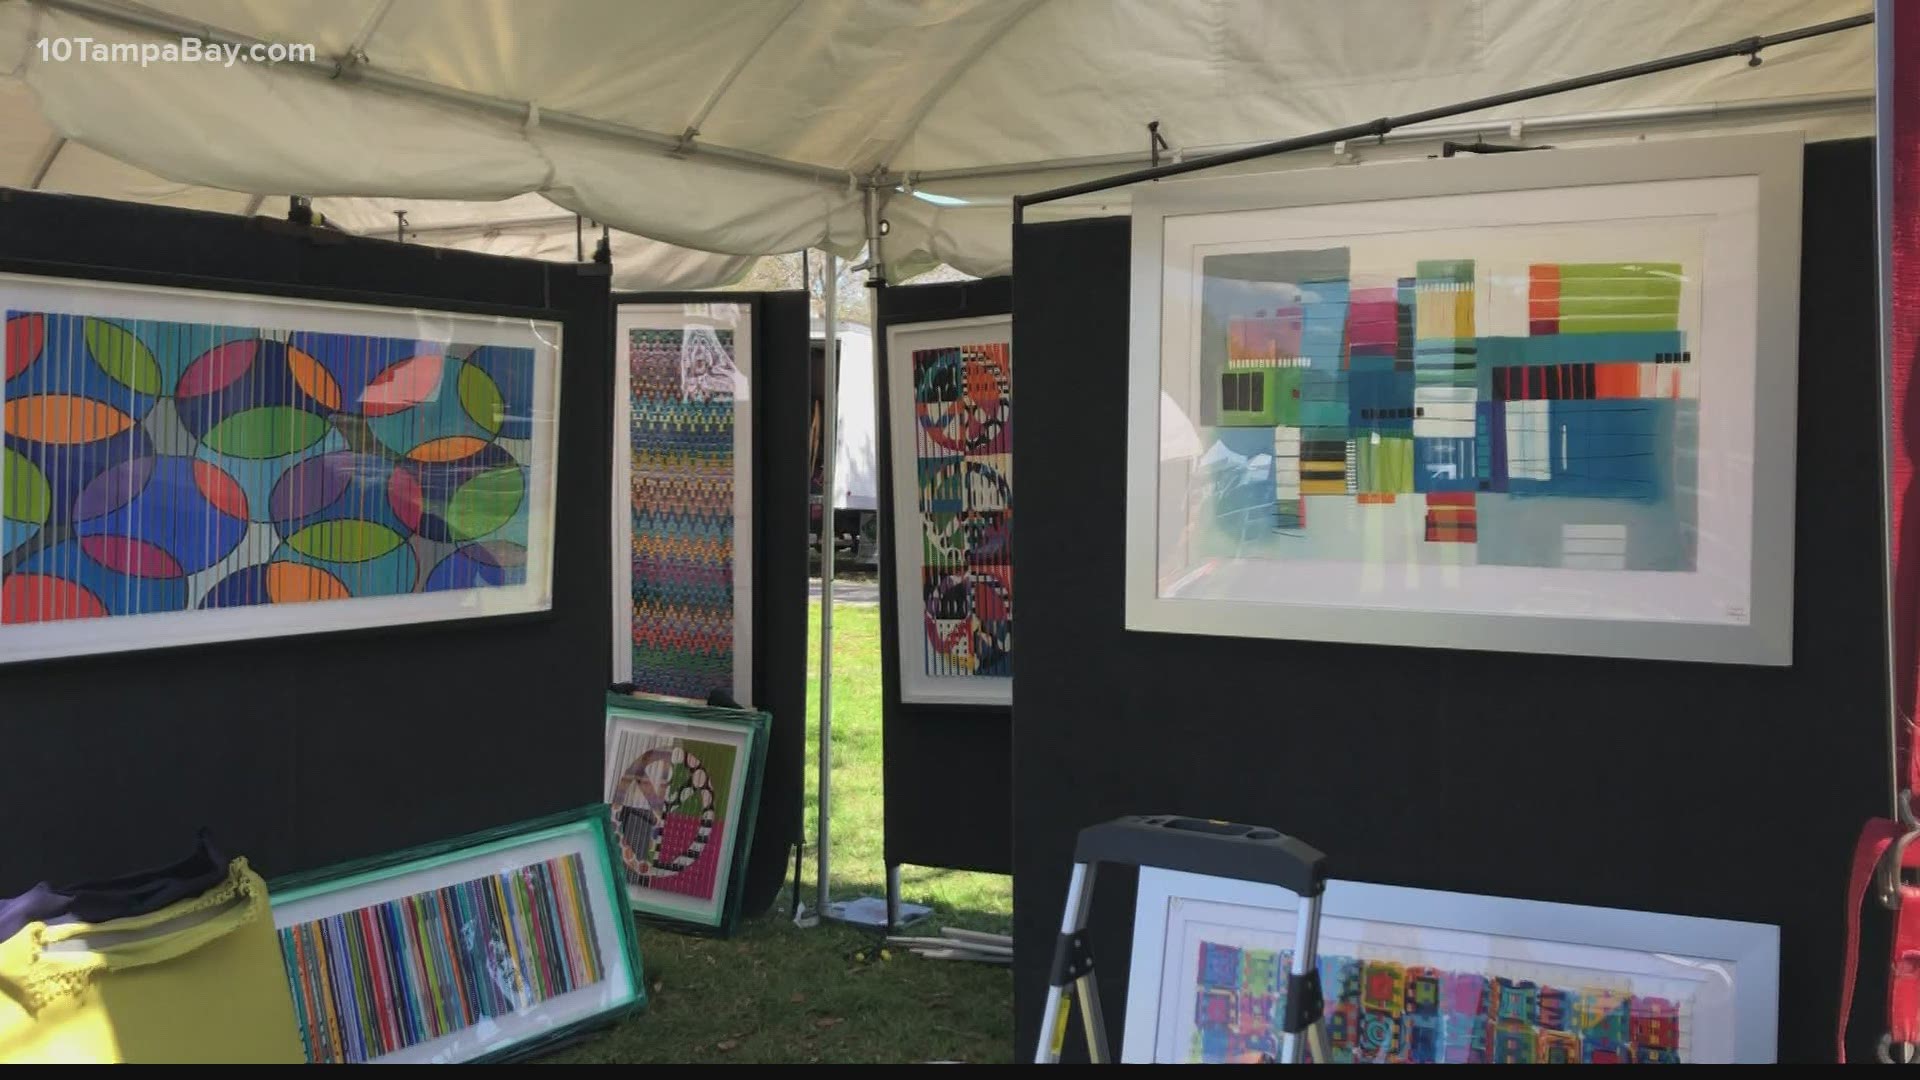 More than 75 artists will be featured at the free art show this Saturday and Sunday at South Straub Park